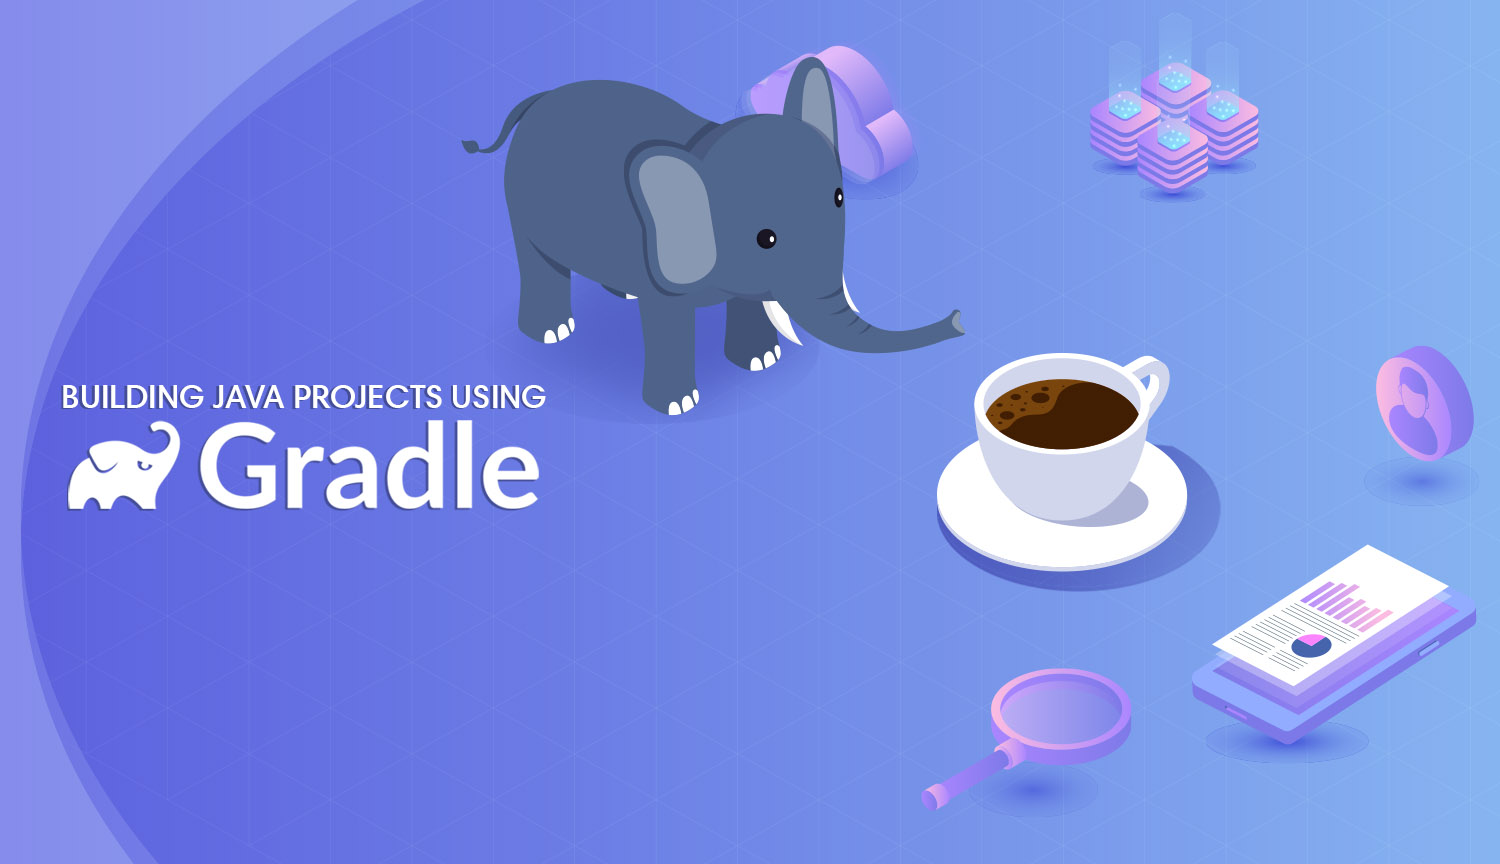 Building Java Projects with Gradle